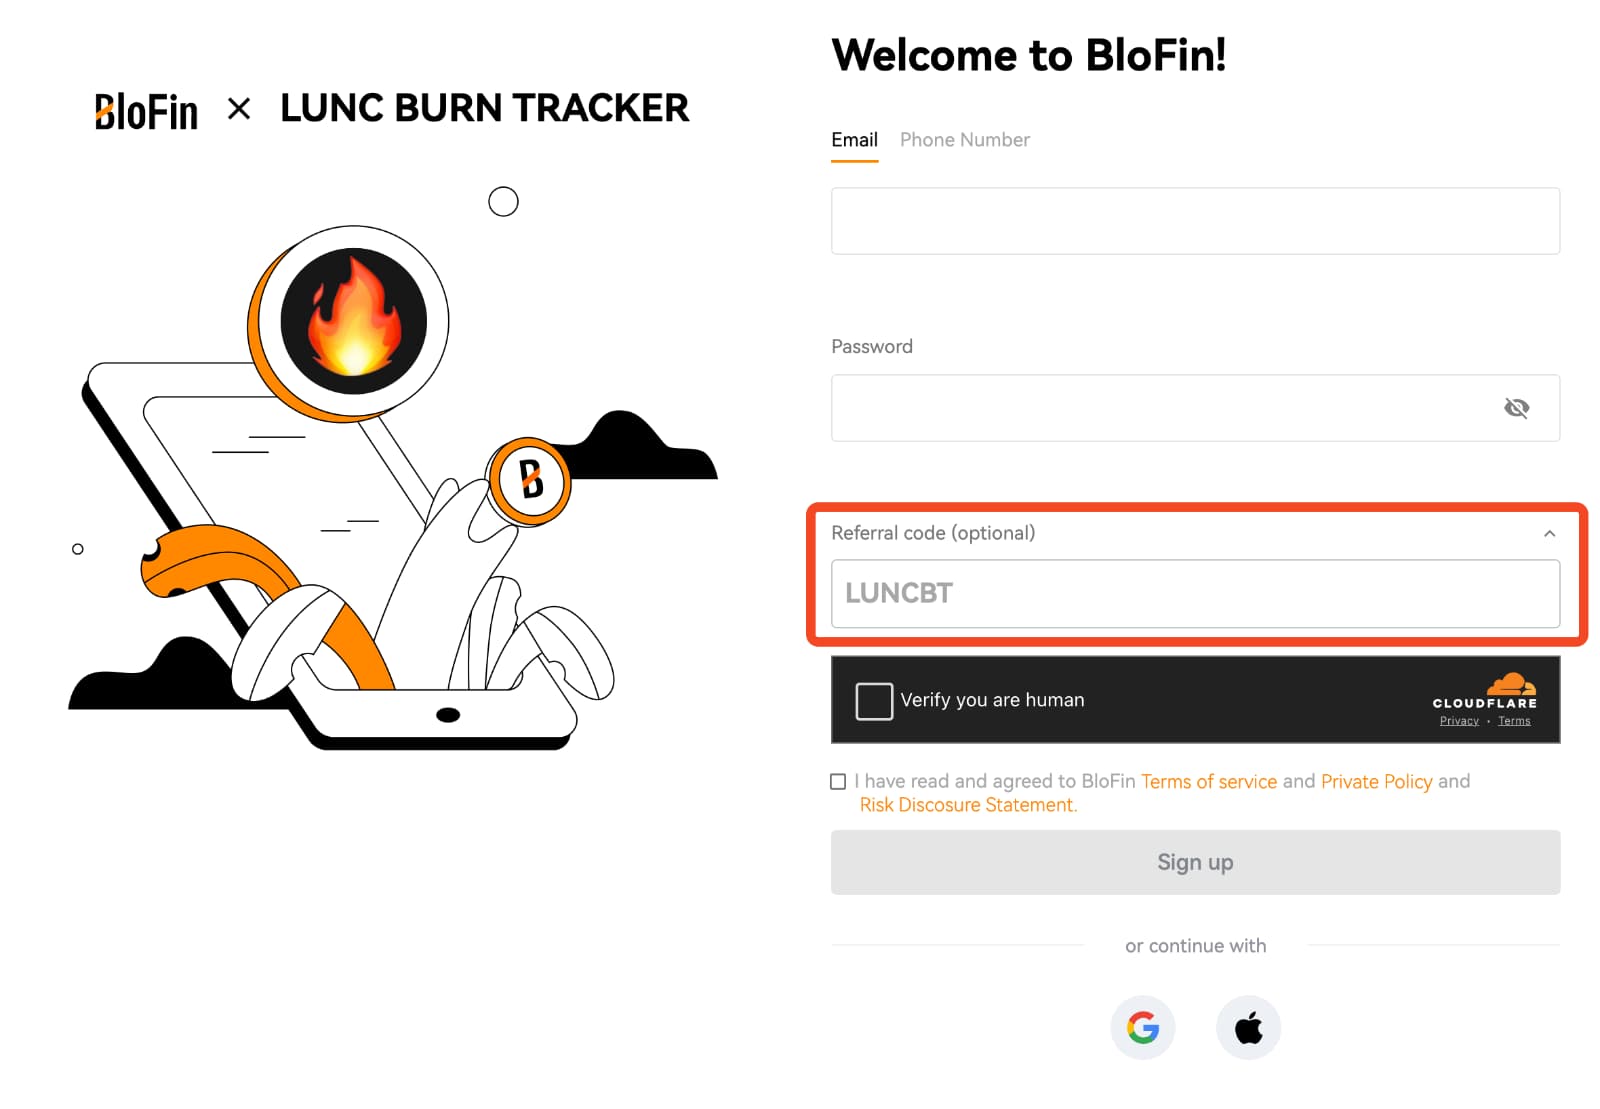 Registration Form using the Blofin Referral Code